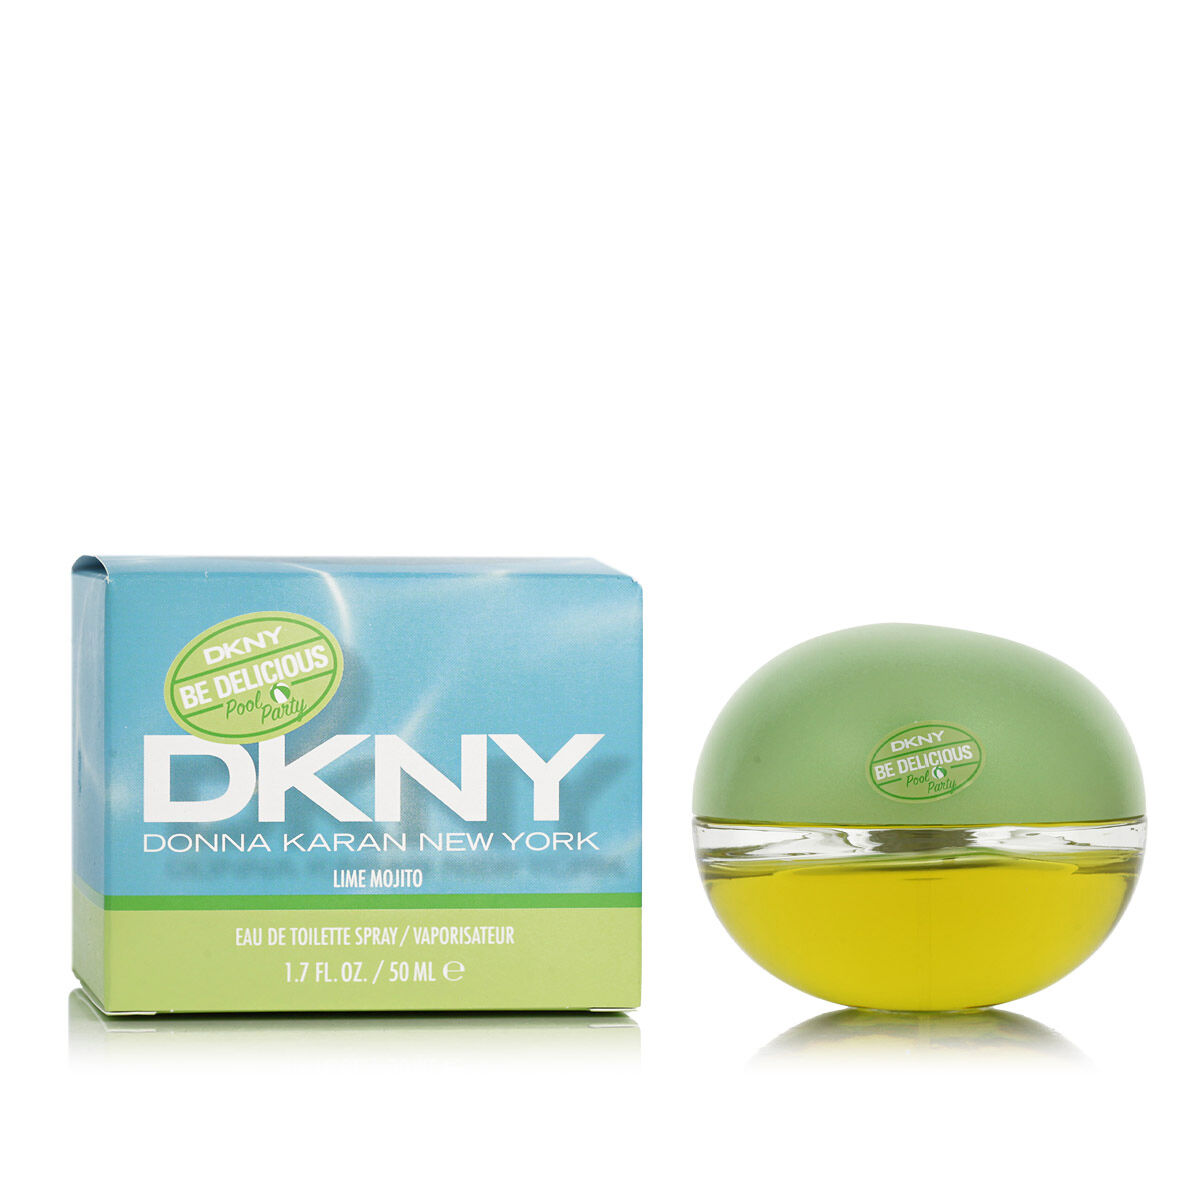 Parfum Unisexe DKNY EDT Be Delicious Pool Party Lime Mojito 50 ml